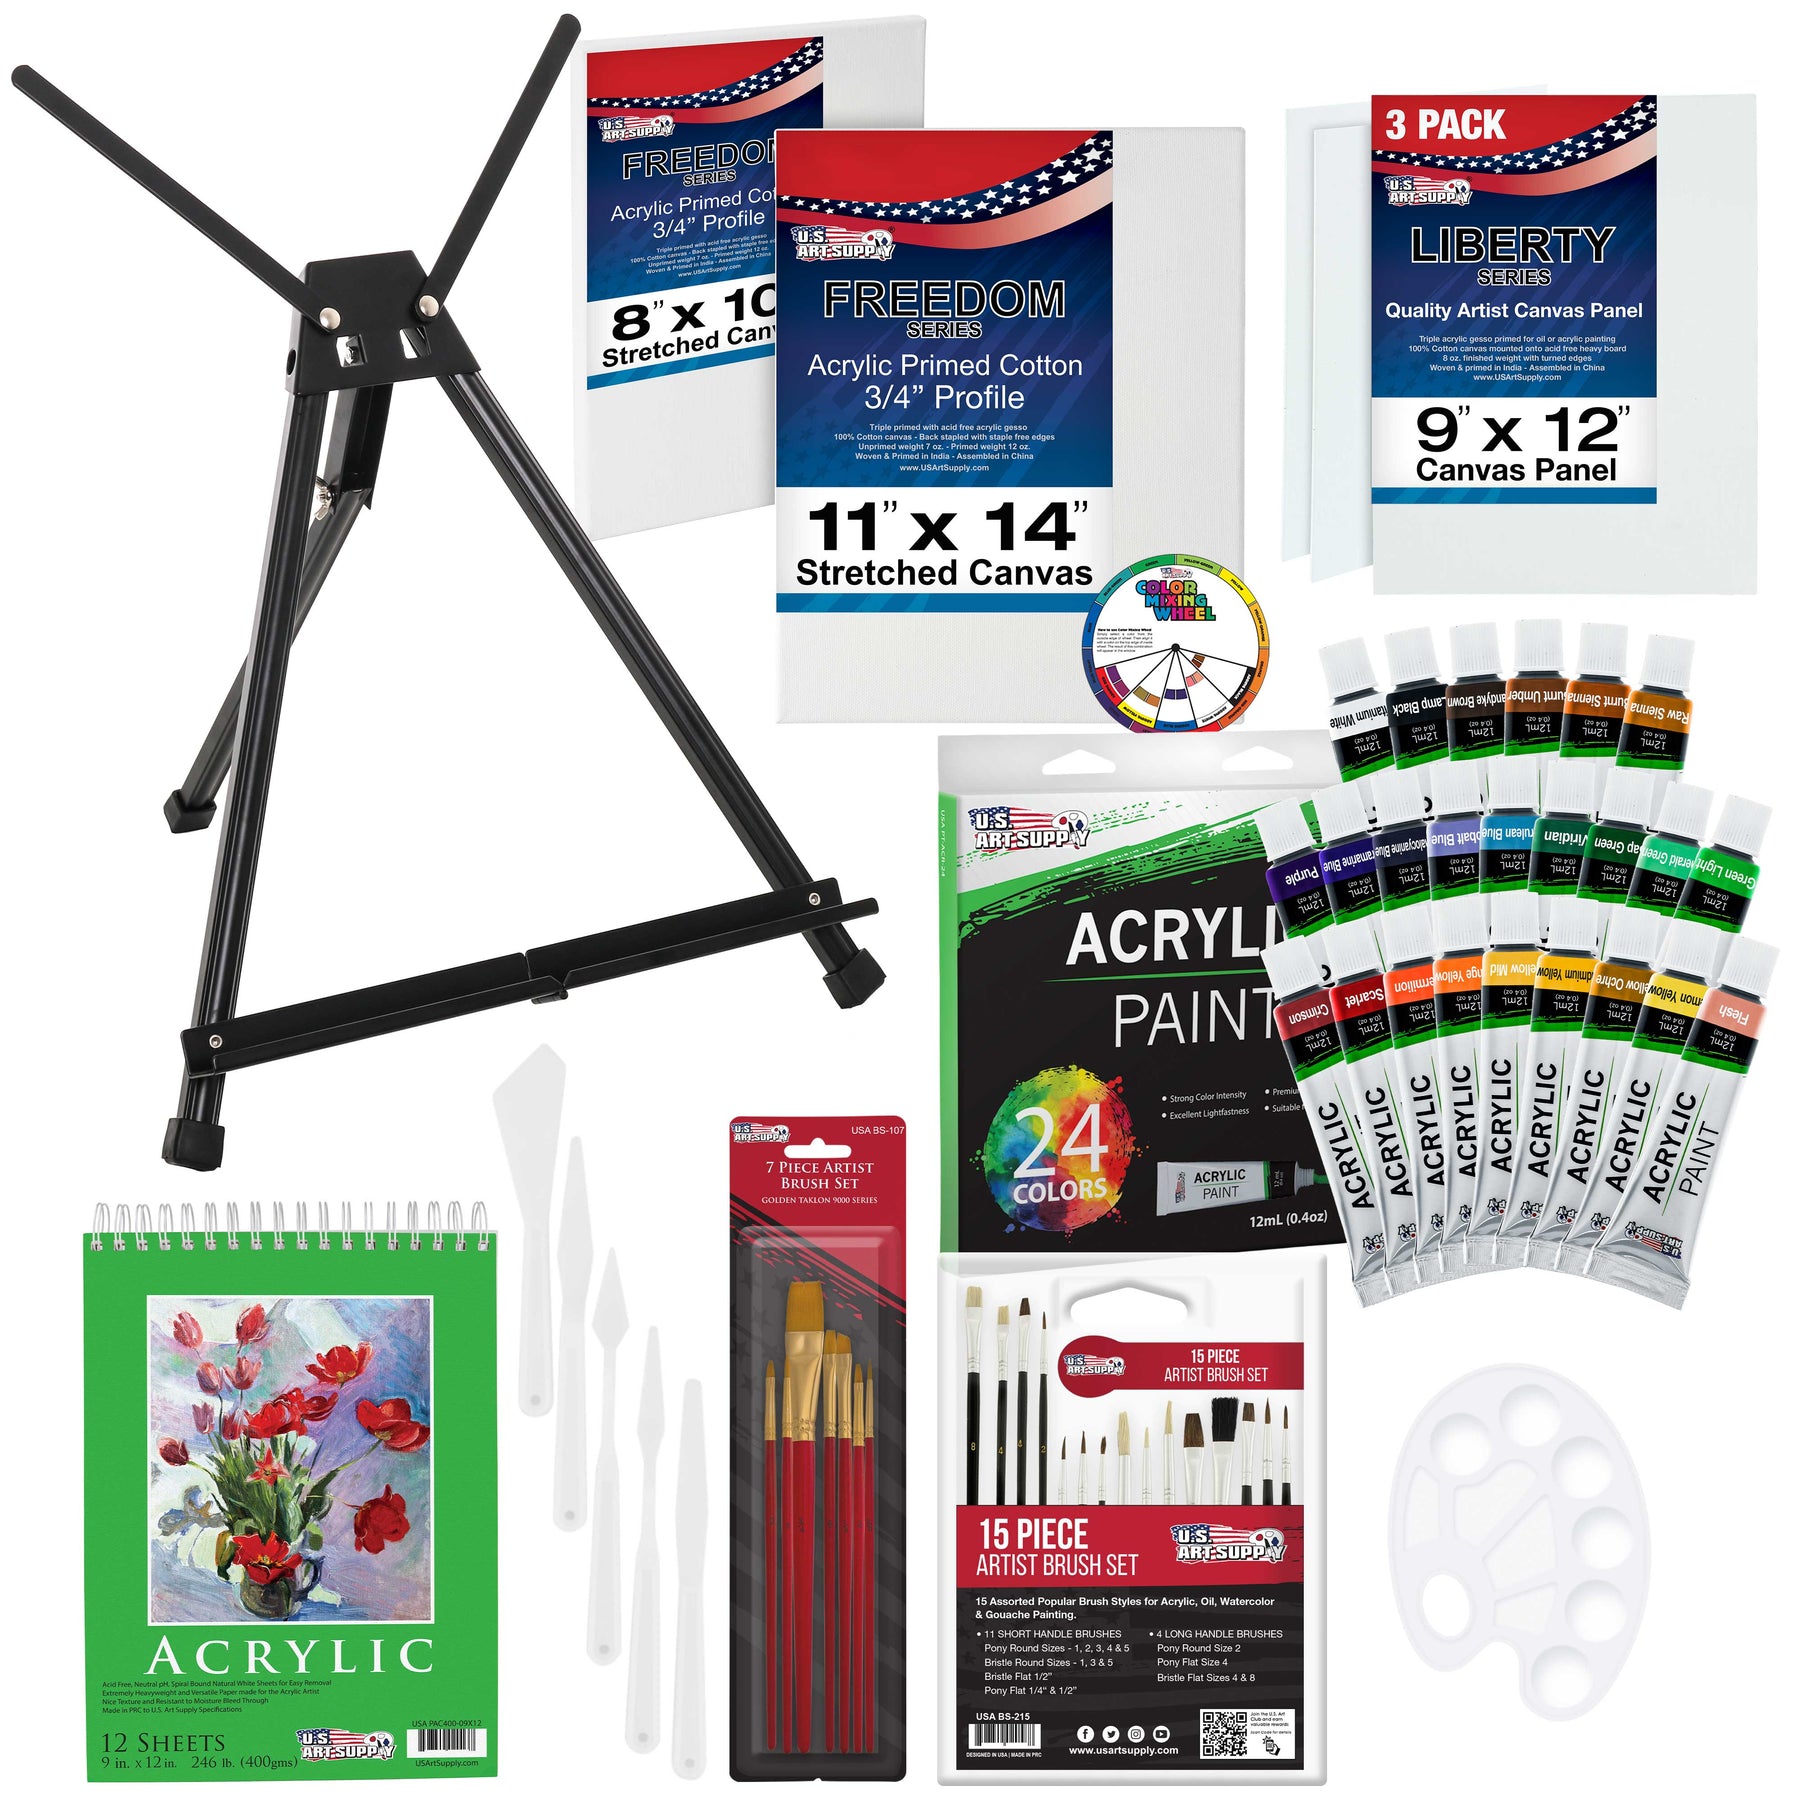  U.S. Art Supply 72-Piece Artist Acrylic Painting Set with  Aluminum Field Easel, Wood Table Easel, 24 Acrylic Paint Colors, 34  Brushes, 2 Stretched Canvases, 6 Canvas Panels, Painting Pad, 2 Palettes